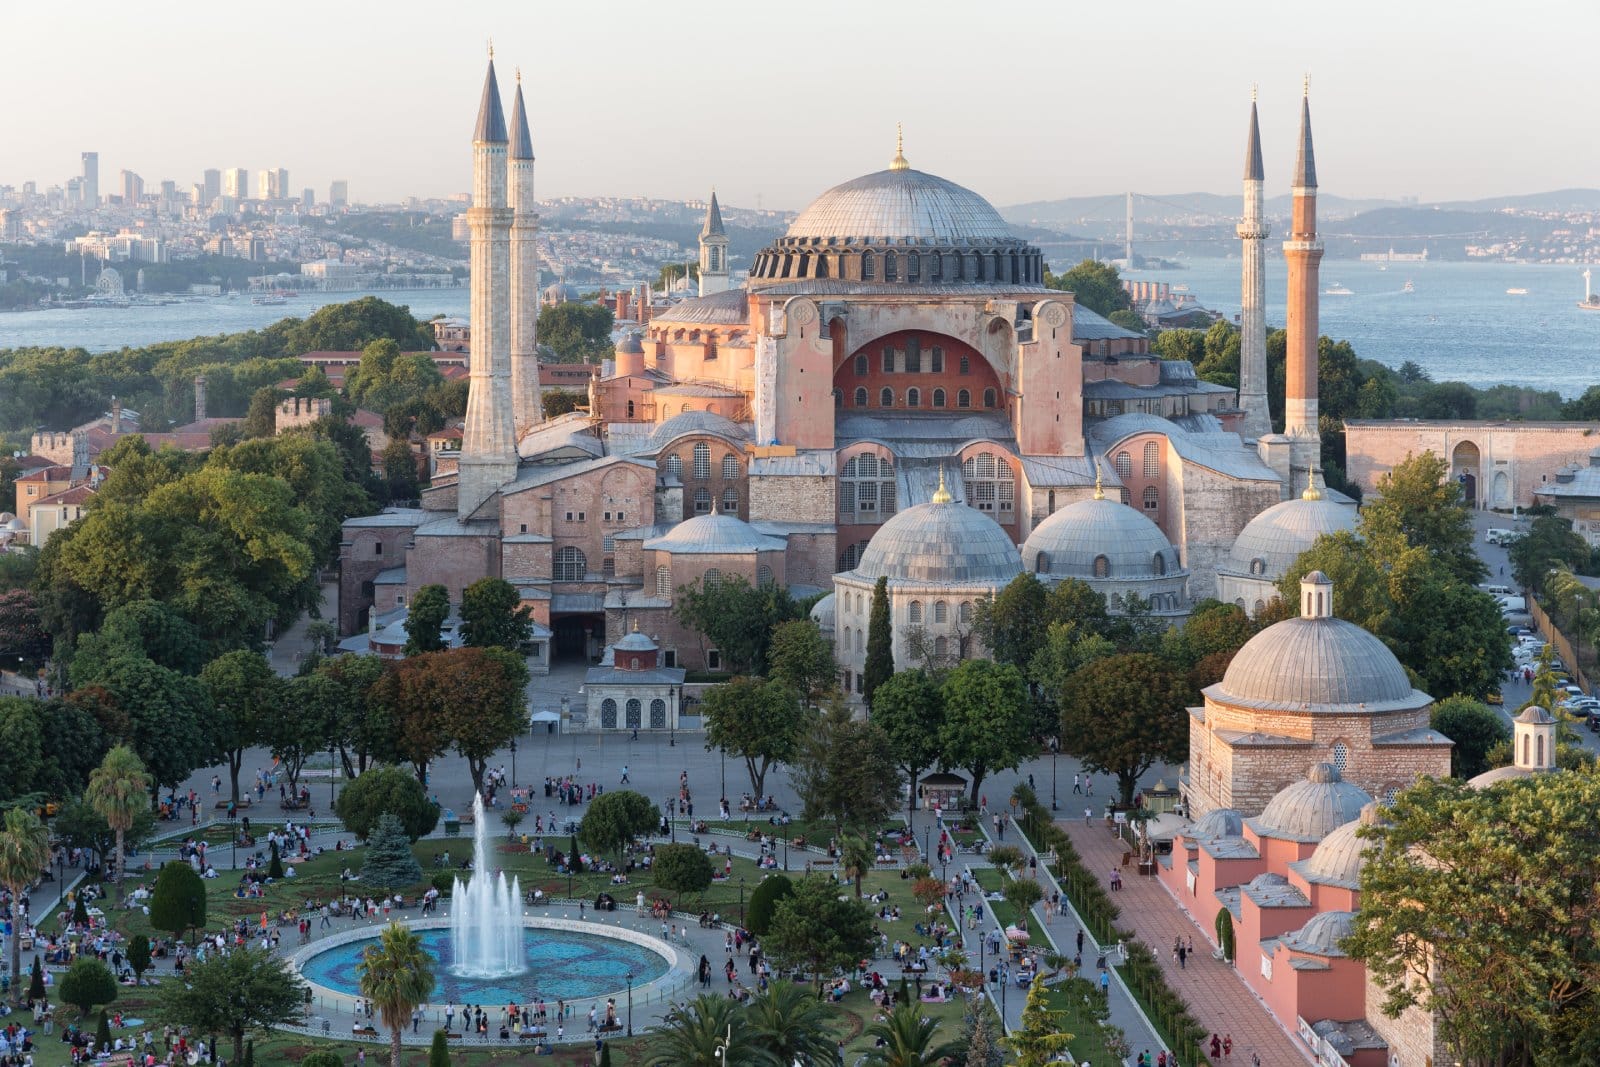 <p class="wp-caption-text">Image Credit: Shutterstock / Mehmet Cetin</p>  <p><span>The Hagia Sophia, a masterpiece of Byzantine architecture, stands as evidence to Istanbul’s complex history. Originally built as a cathedral in the 6th century, it was later converted into a mosque and now serves as a museum. Its massive dome, intricate mosaics, and historical significance make it a must-visit. The Hagia Sophia is not just an architectural marvel; it’s a symbol of the city’s ability to blend different cultures and religions.</span></p>